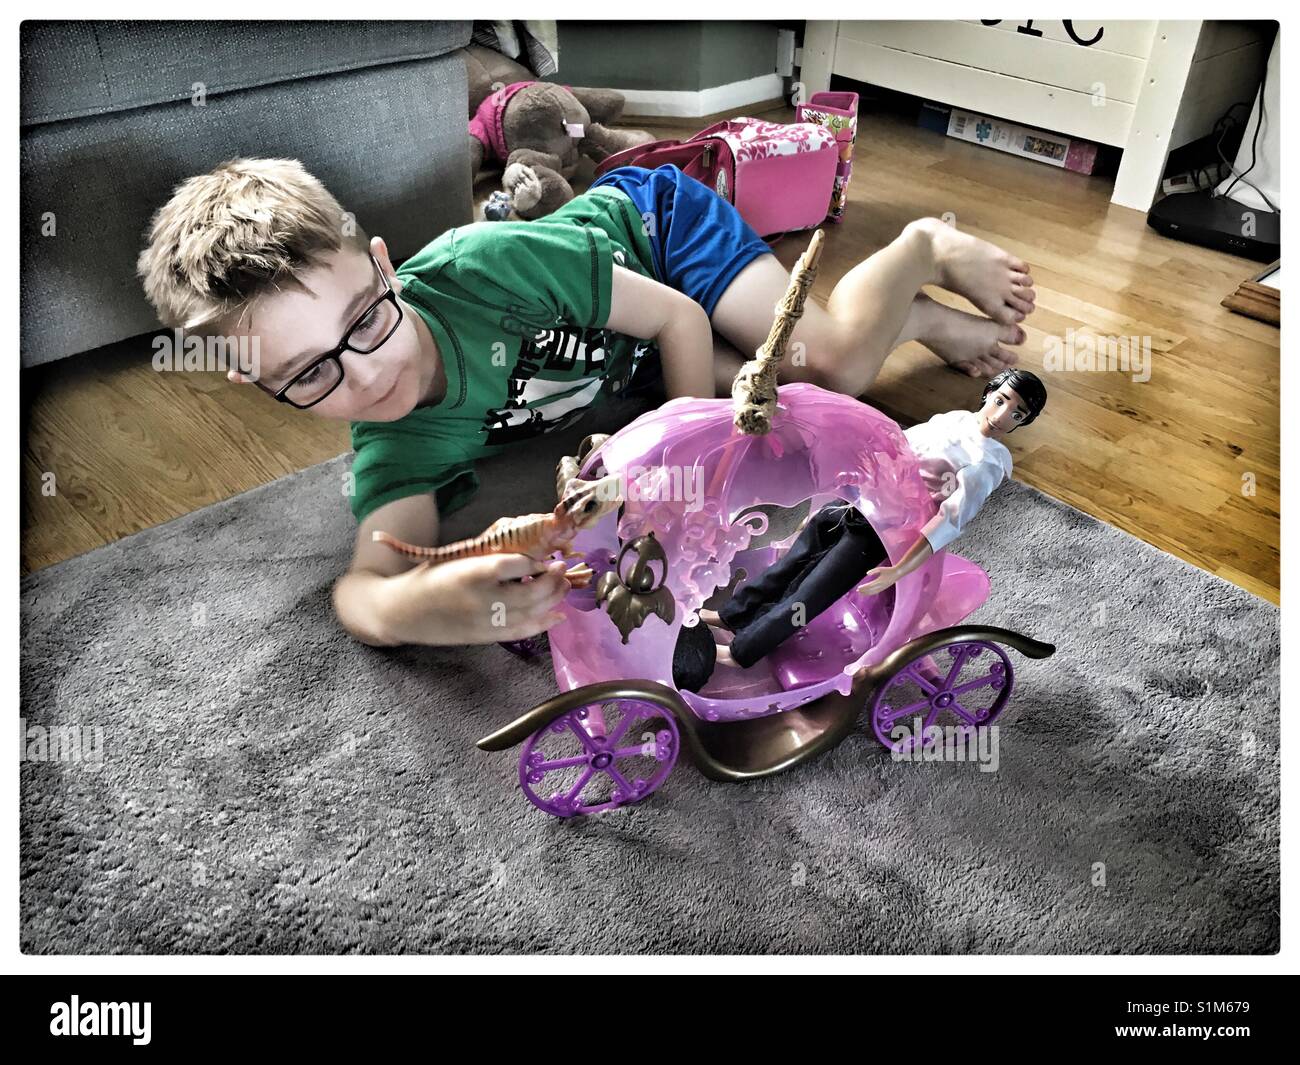 Boys Playing With Dolls High Resolution Stock Photography and Images - Alamy